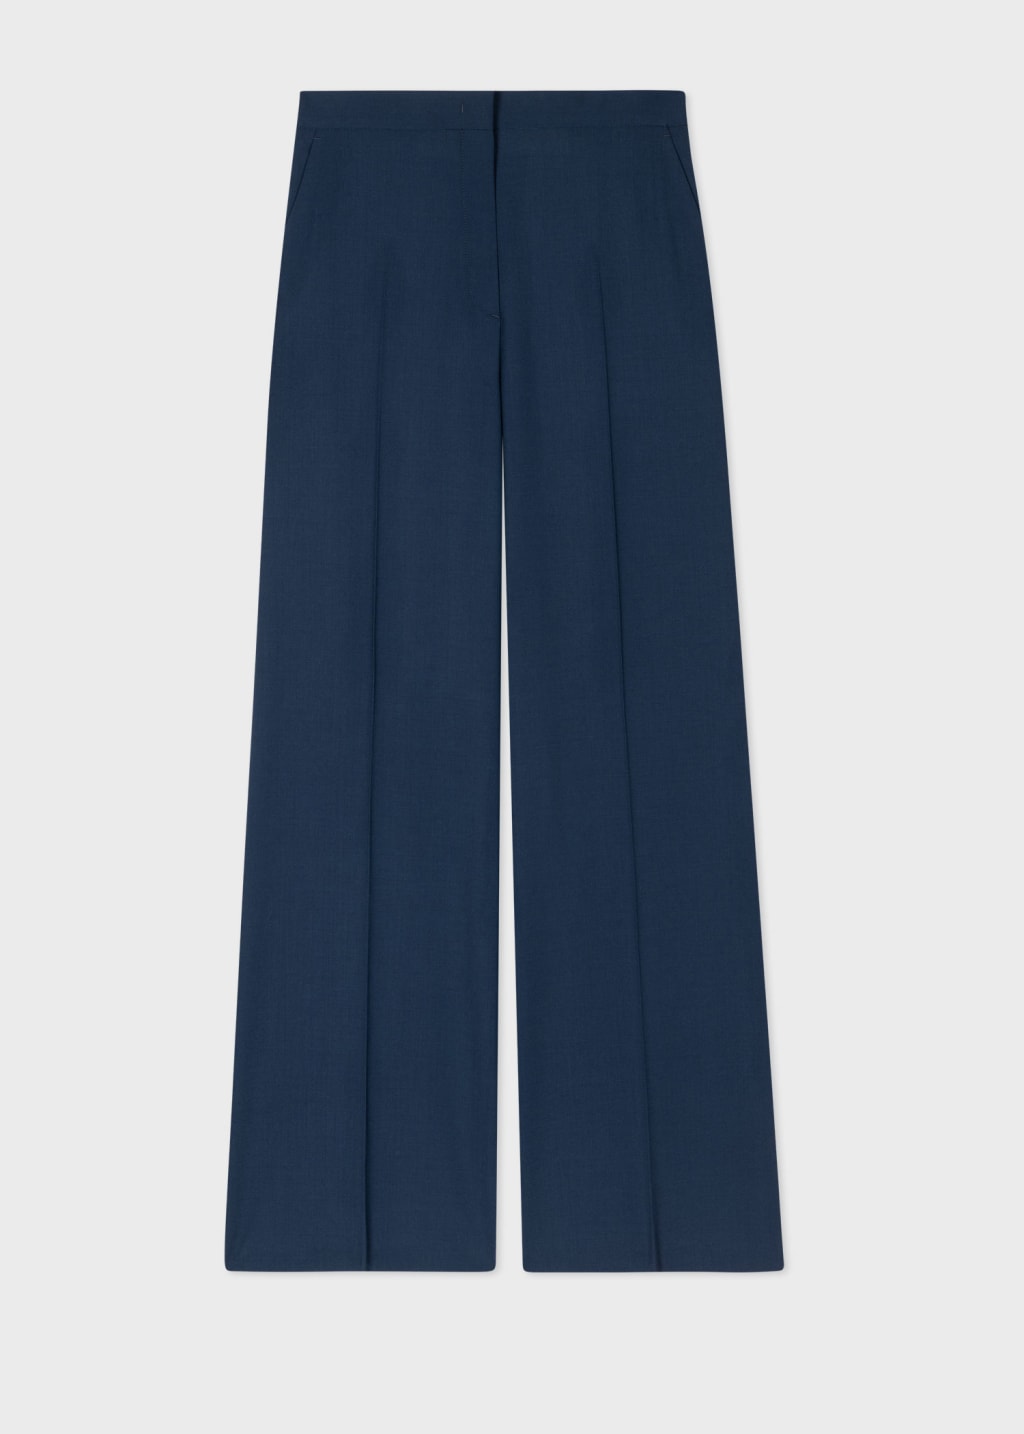 Front View - Women's Navy Wool-Hopsack Wide Leg Trousers by Paul Smith